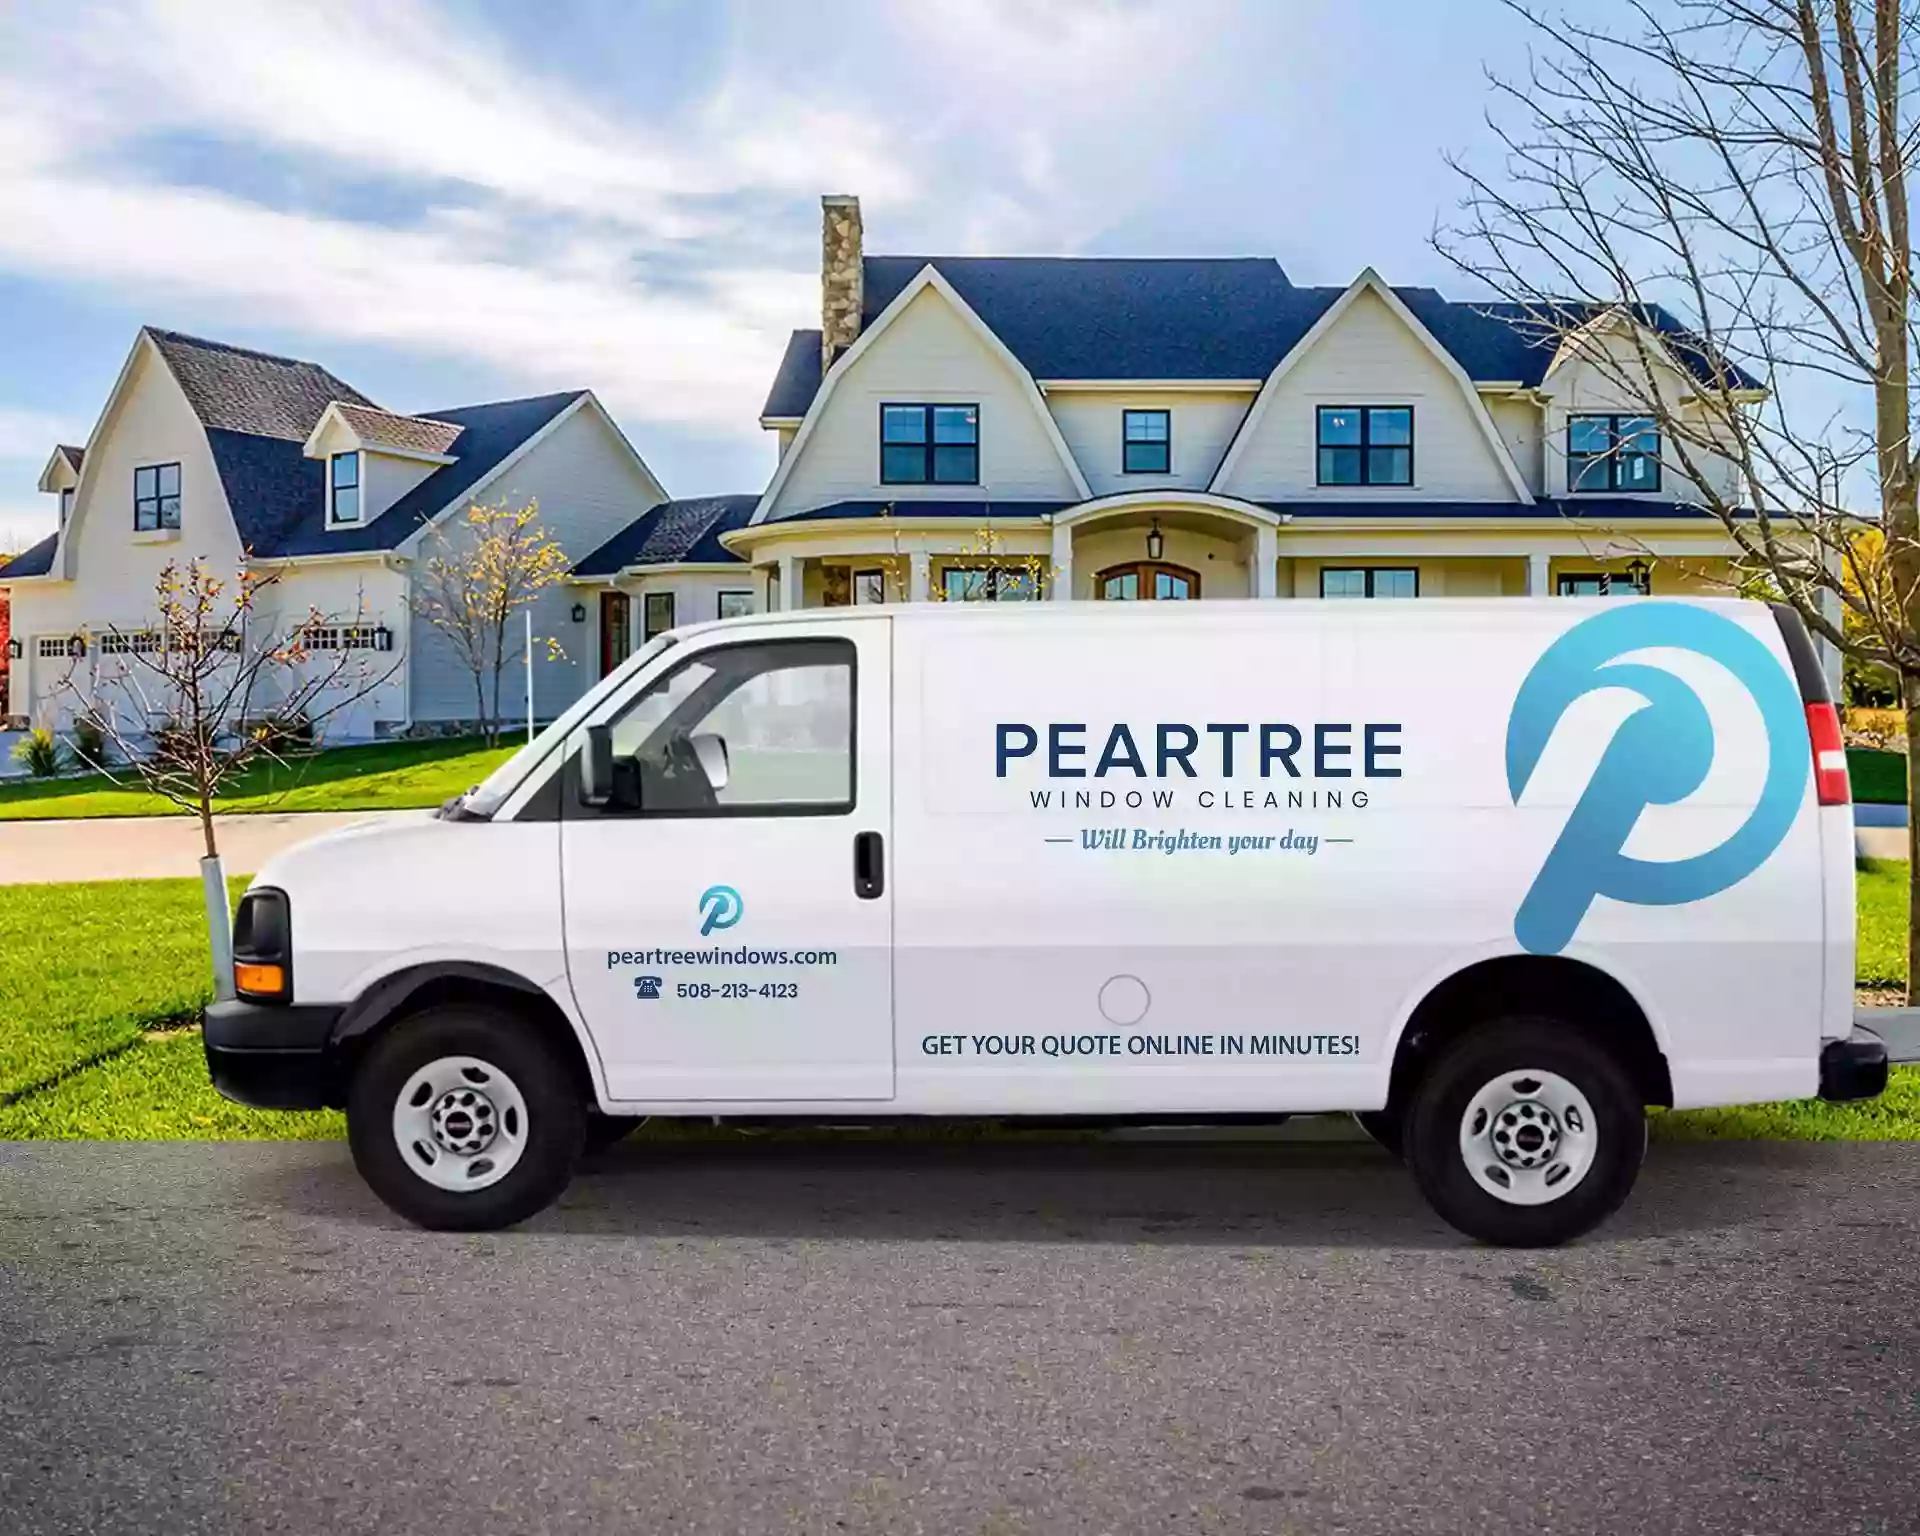 Peartree Window Cleaning